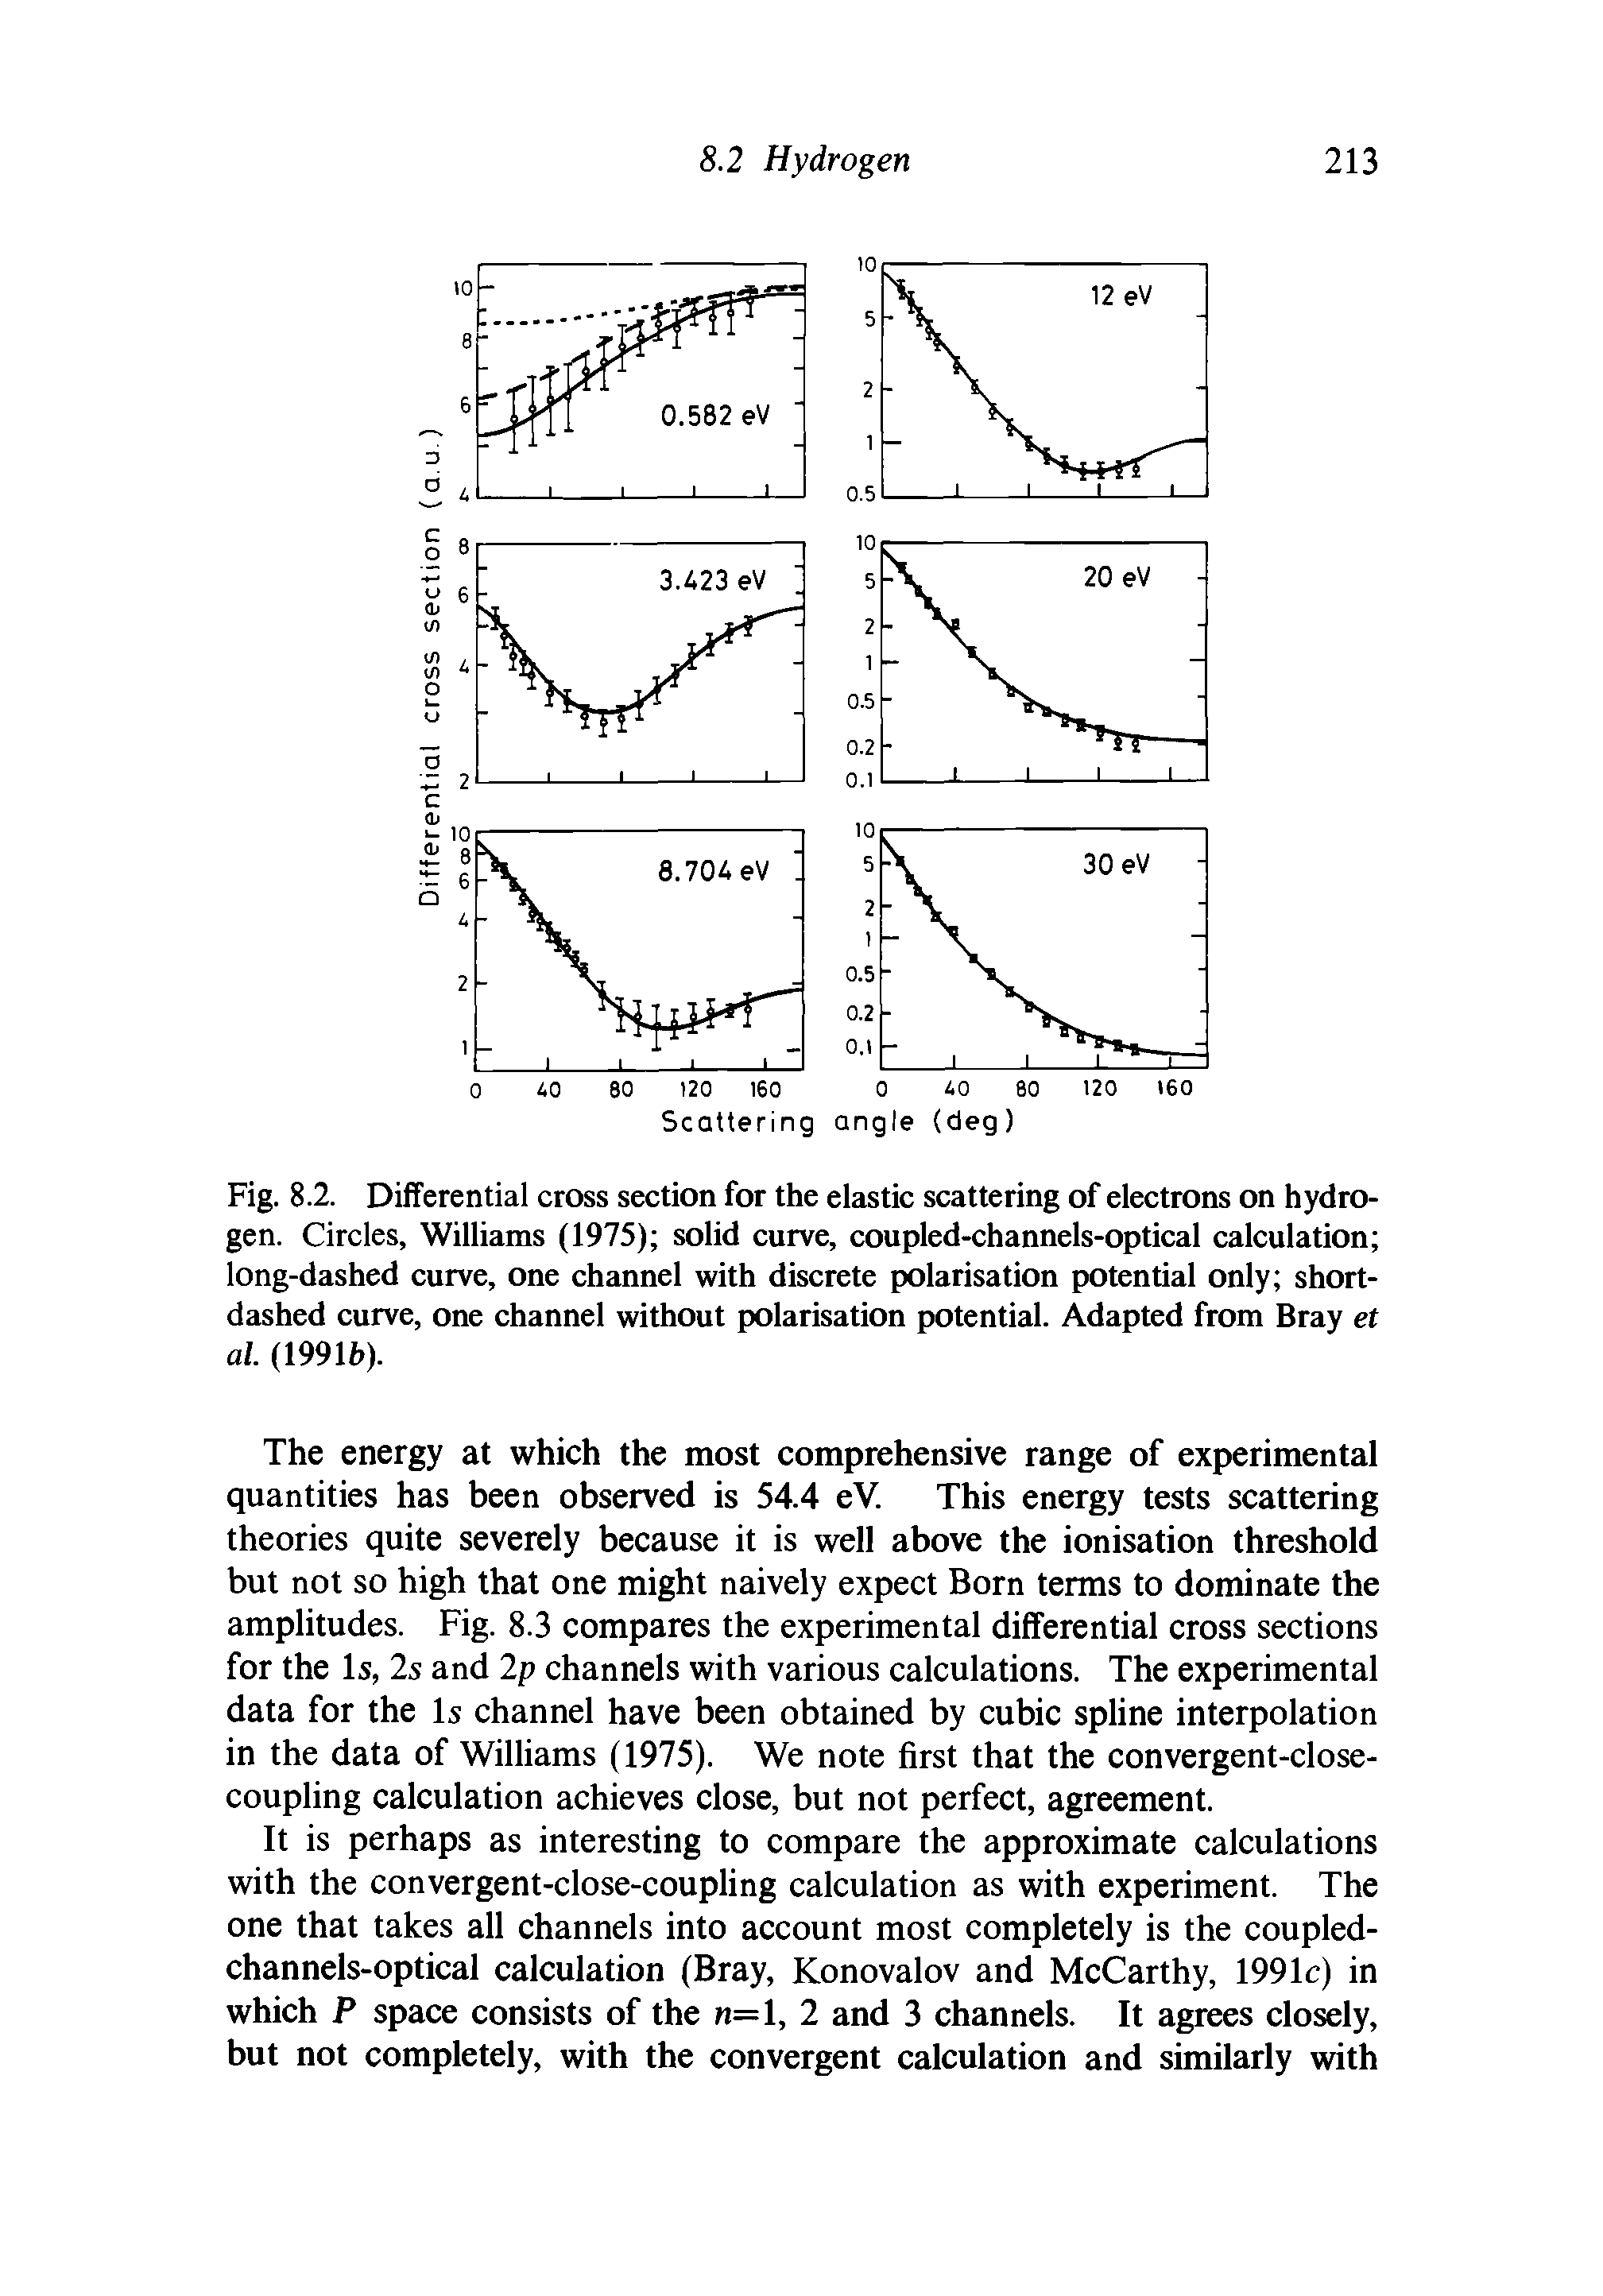 Fig. 8.2. Differential cross section for the elastic scattering of electrons on hydrogen. Circles, Williams (1975) solid curve, coupled-channels-optical calculation long-dashed curve, one channel with discrete polarisation potential only short-dashed curve, one channel without polarisation potential. Adapted from Bray et al. (1991h).